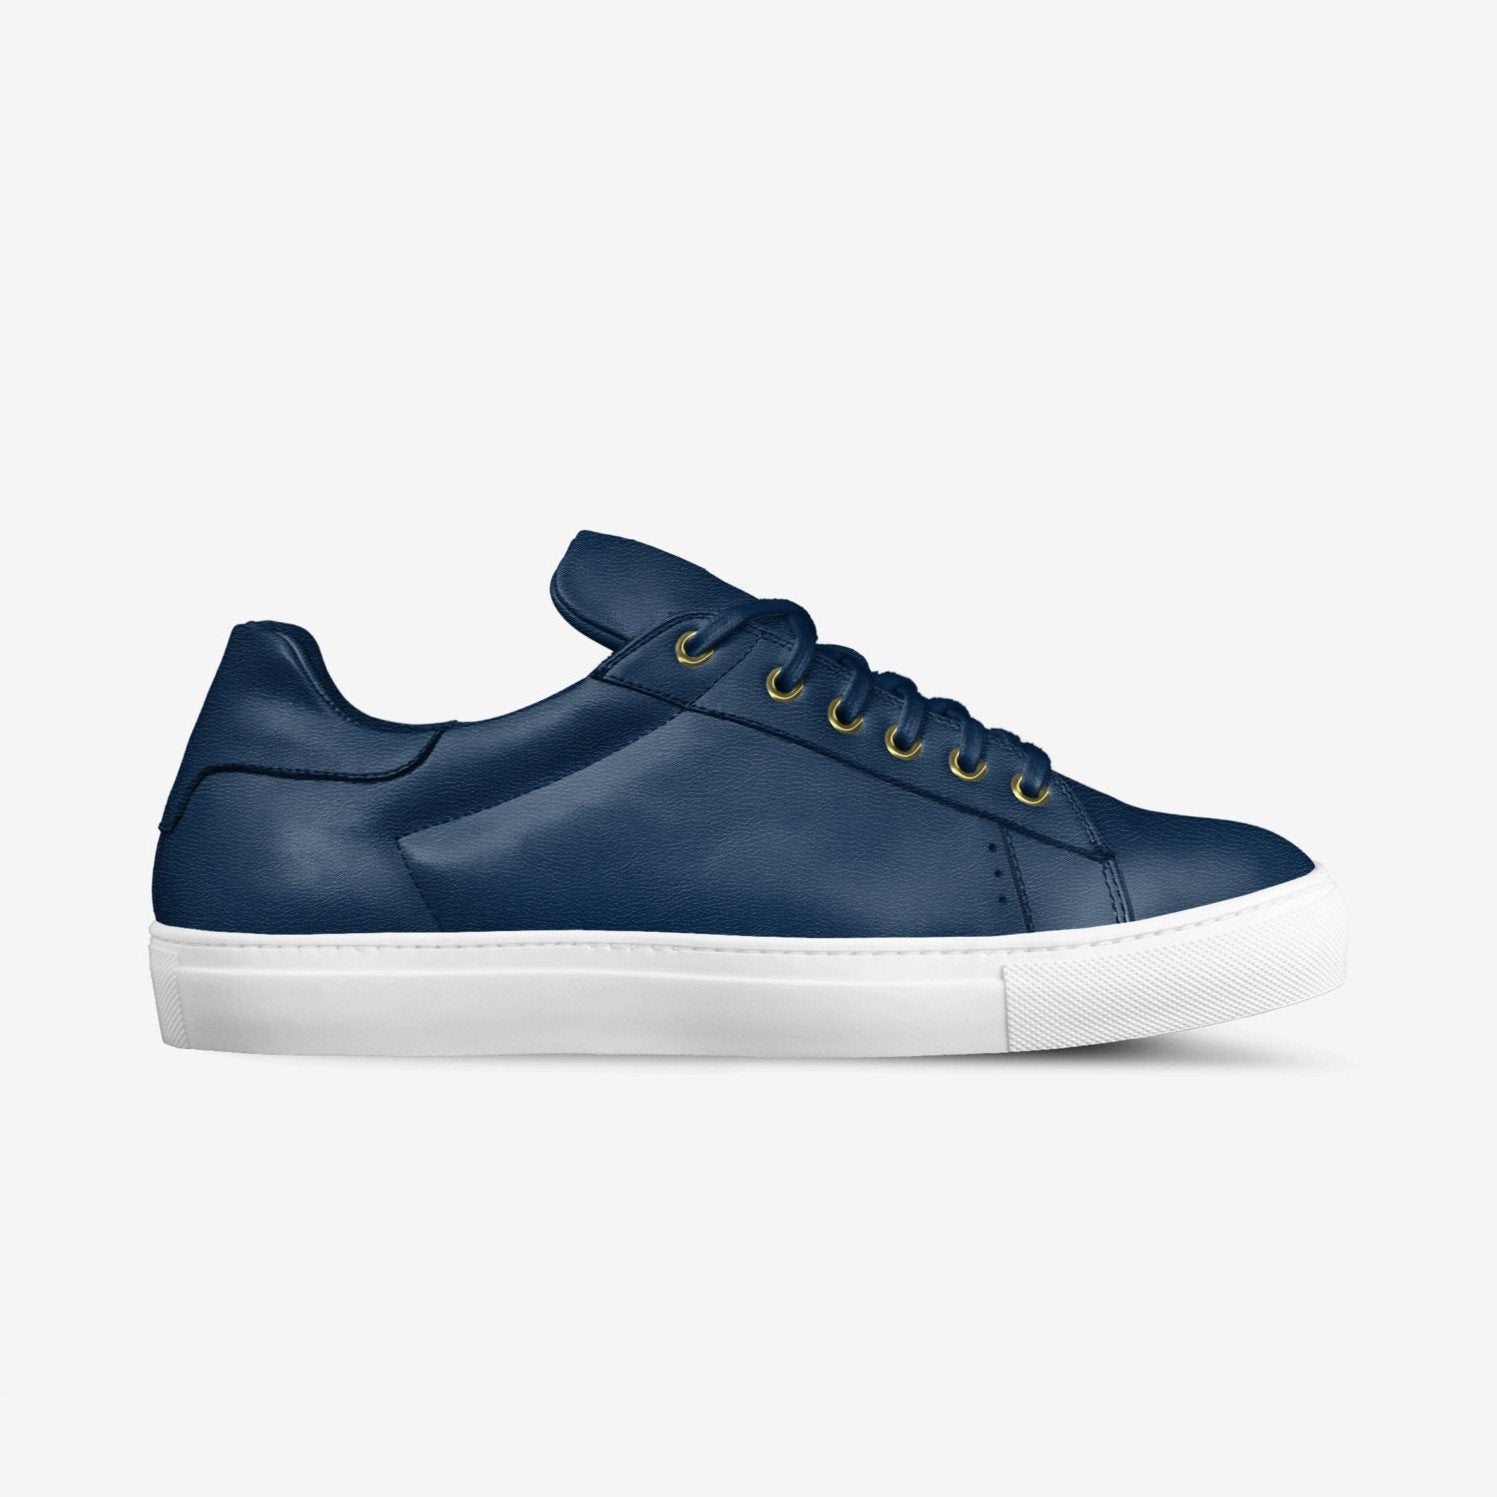 LORENZO LEATHER SNEAKERS IN MIDNIGHT BLUE | Poor Little Rich Boy Clothing